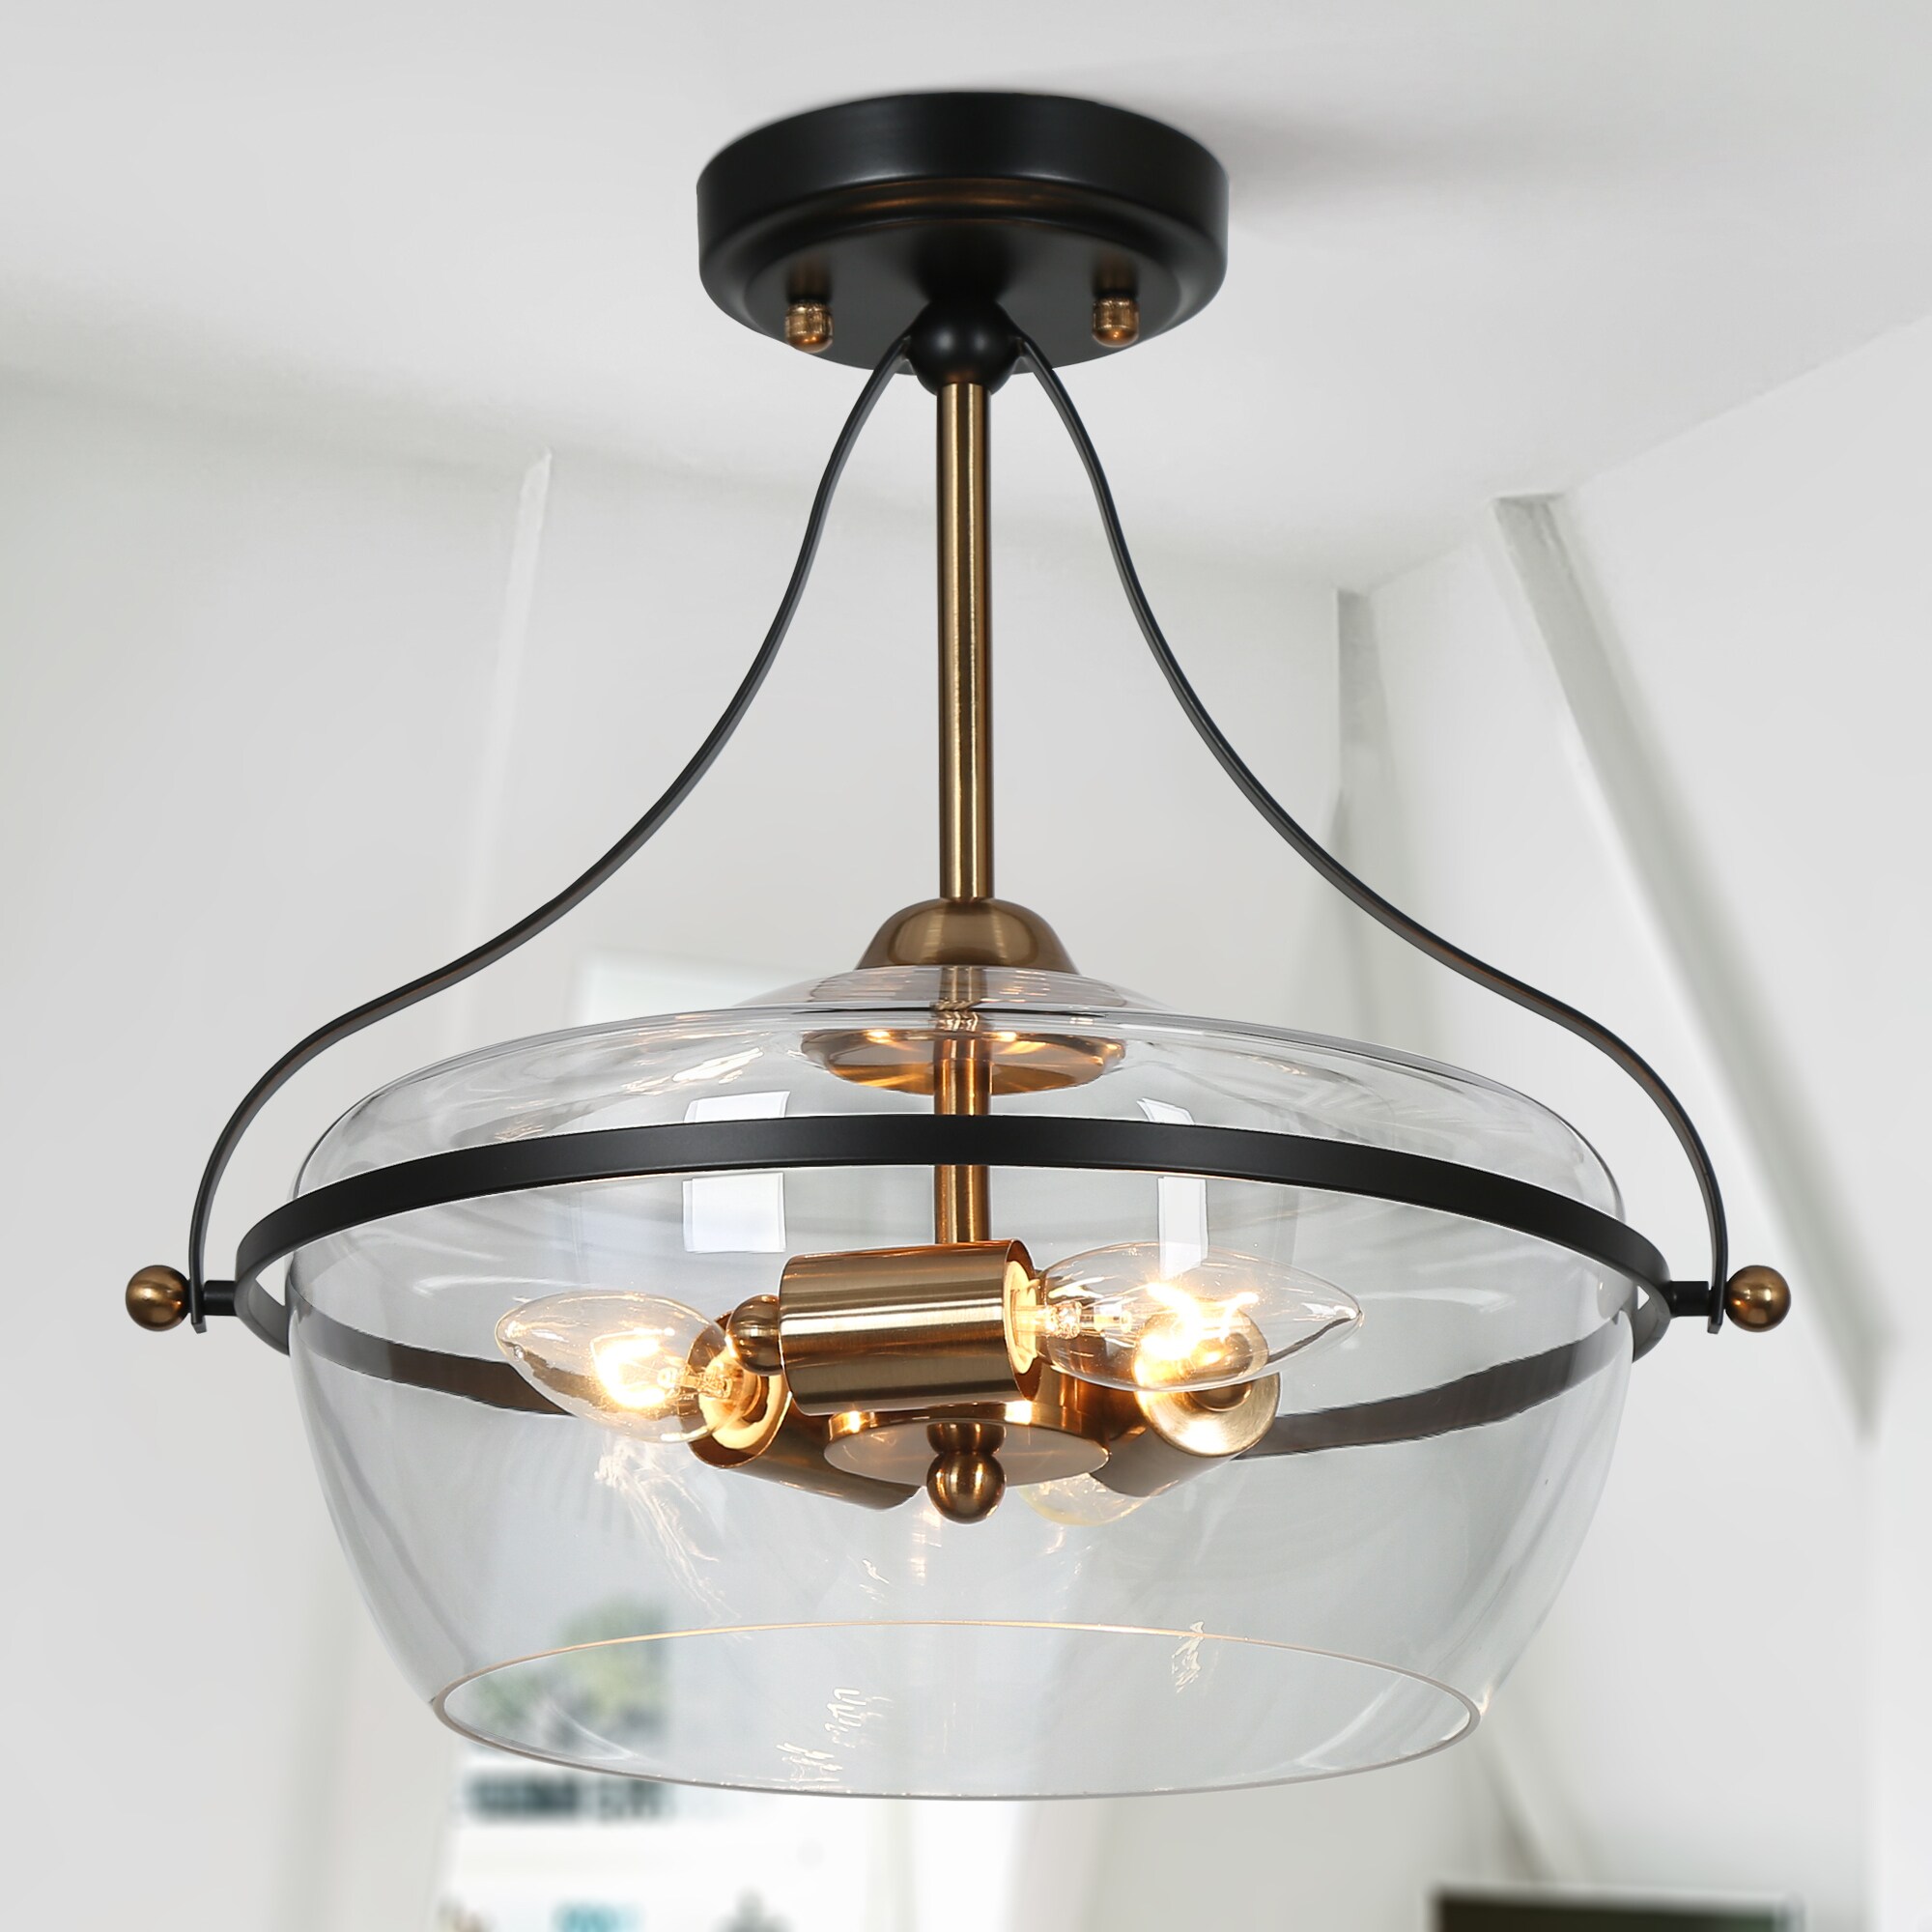 Single Ceiling Light with Folded Bars Colonial Revival Hallway Lighting Fixture 